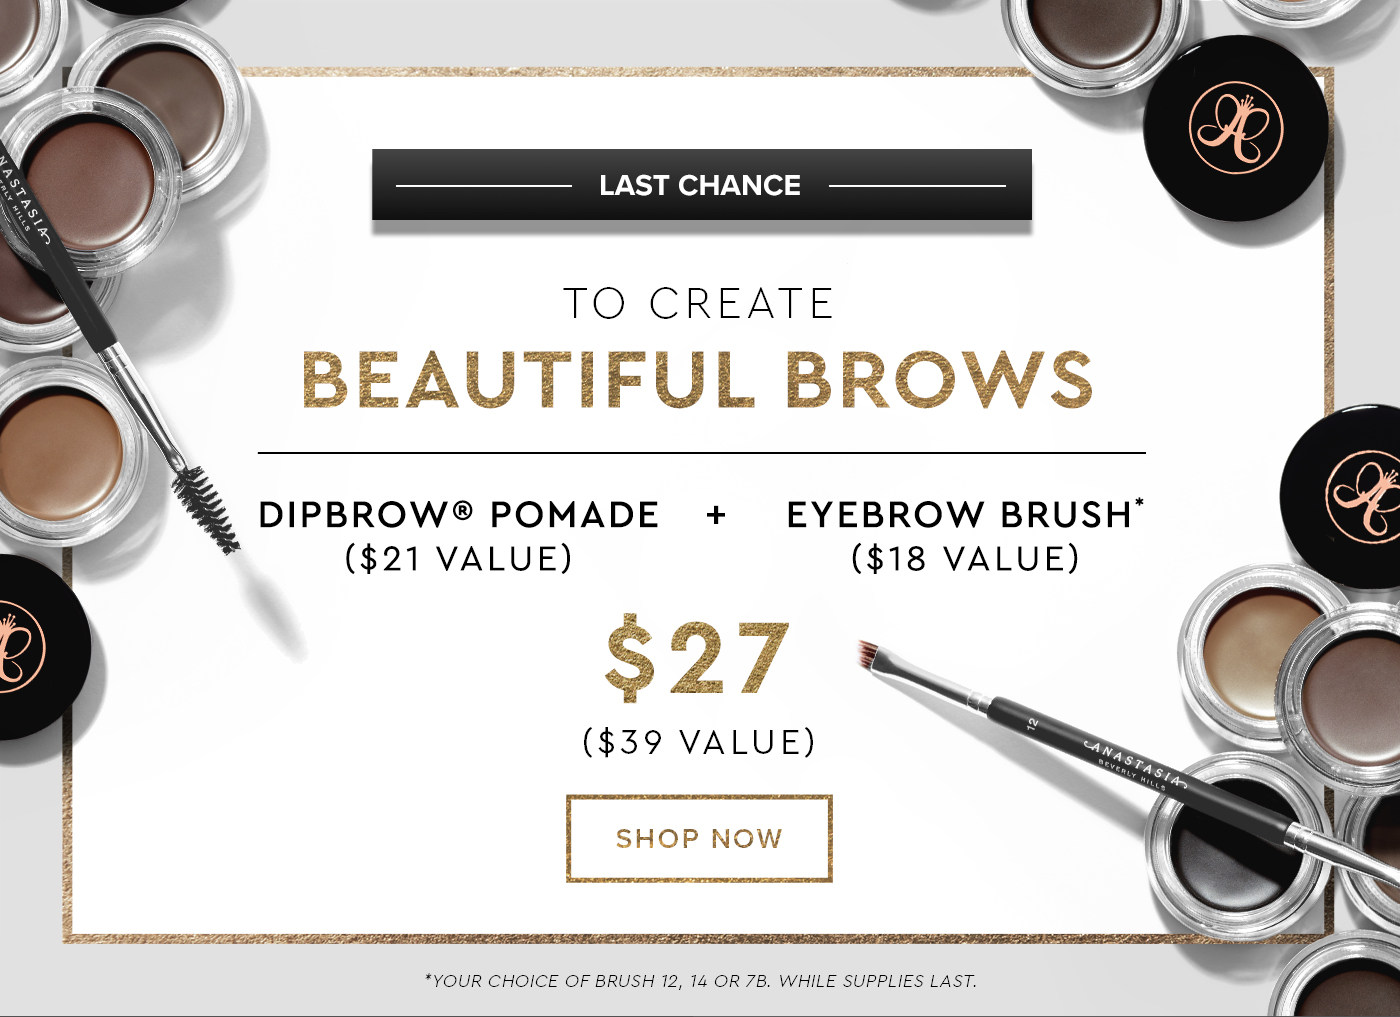 Last Chance to Create Beautiful Brows